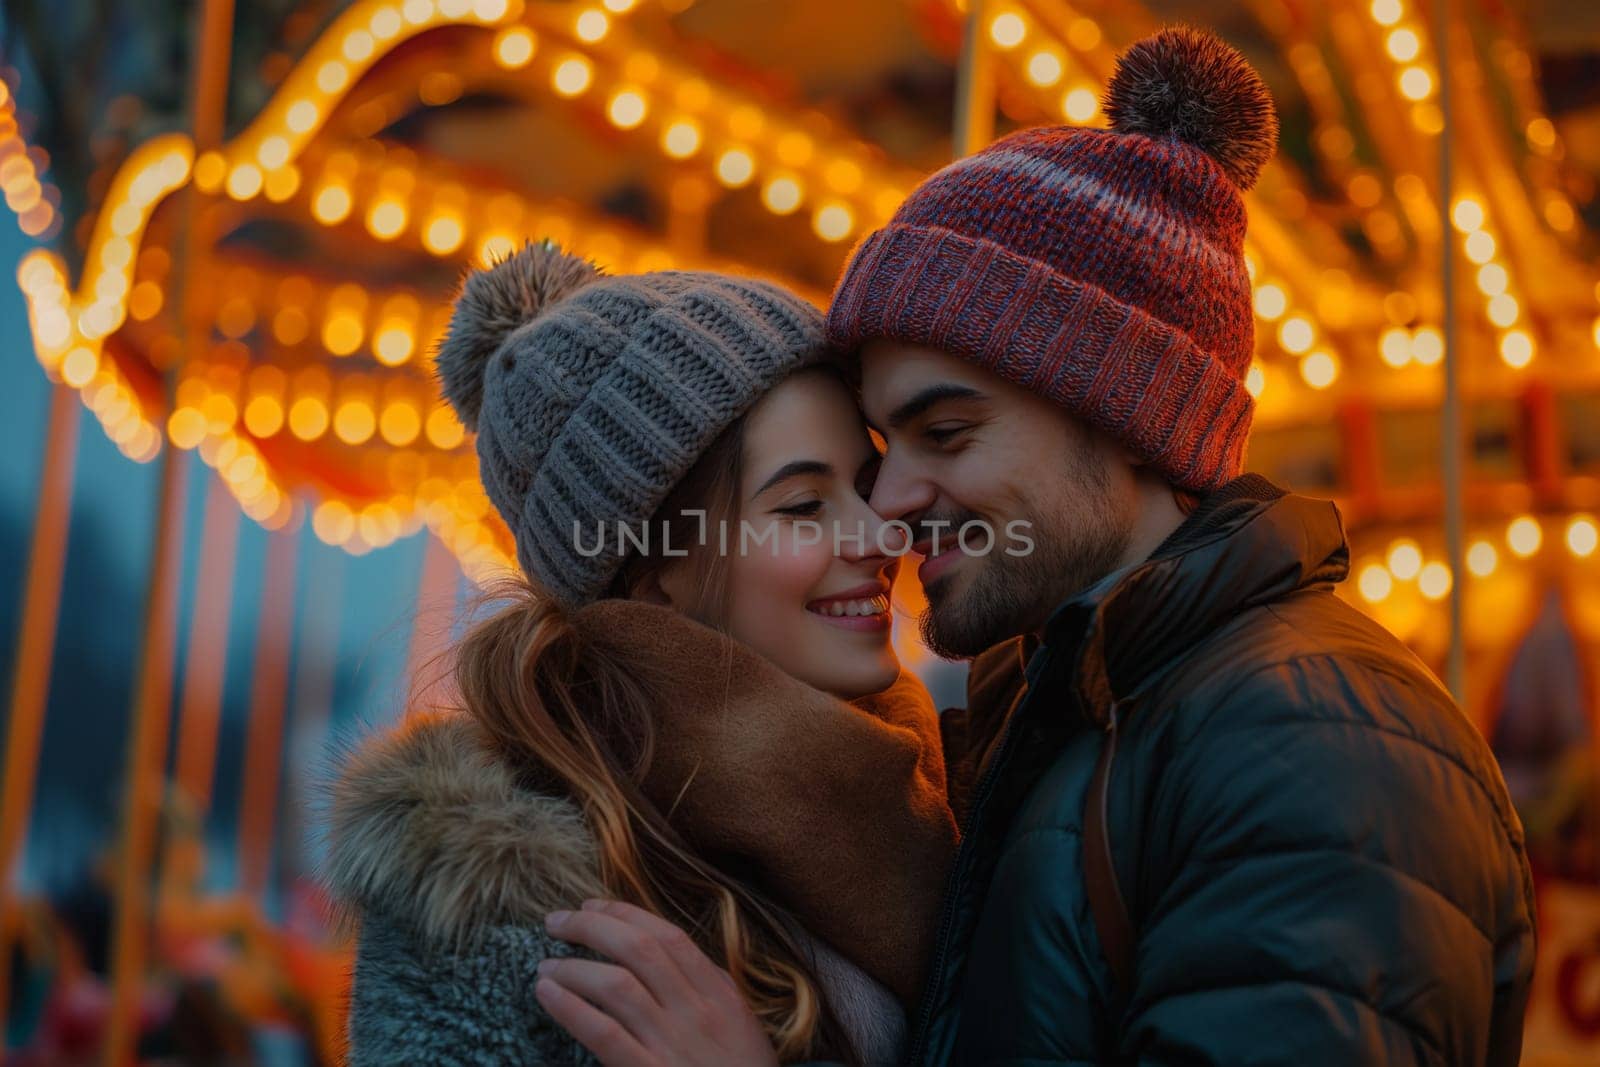 Affectionate young tourist couple at an illuminated carousel in the city at dusk.